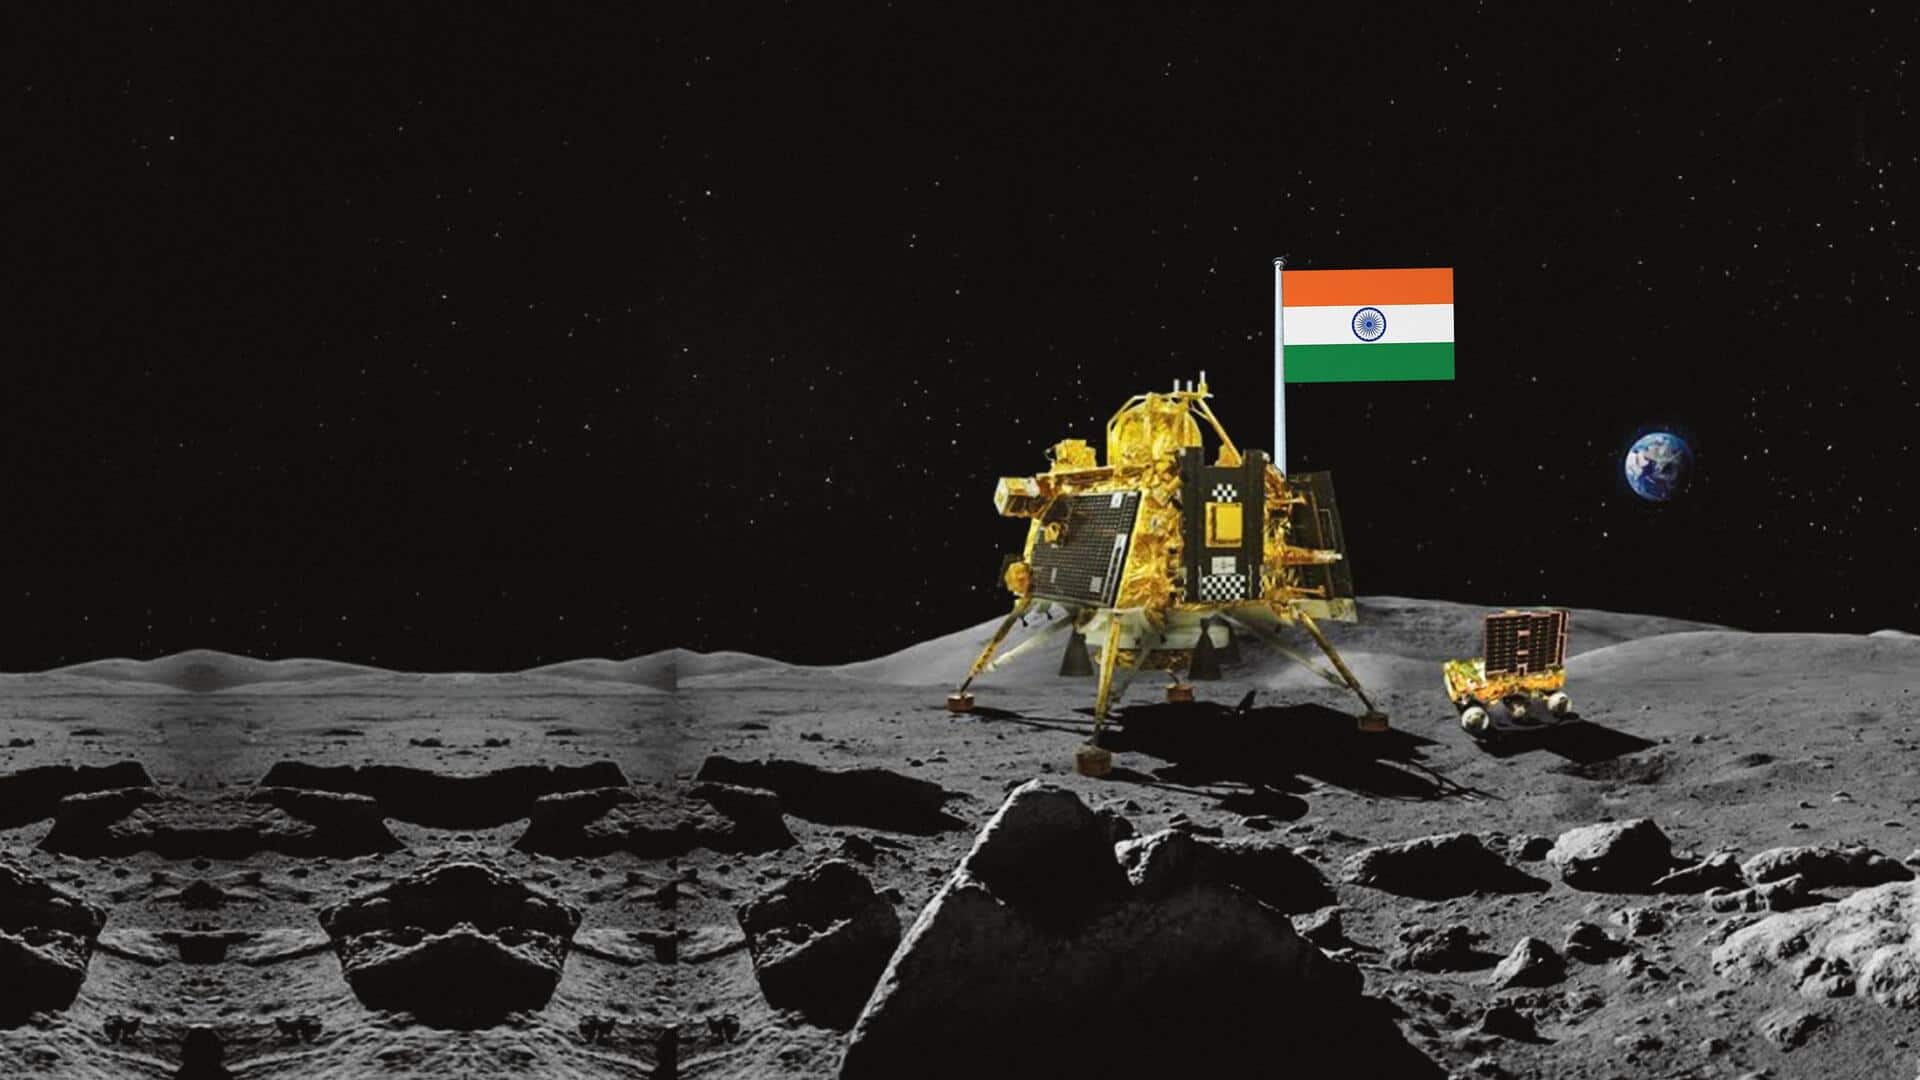 After sulphur and oxygen discovery, Chandrayaan-3 now searching for hydrogen